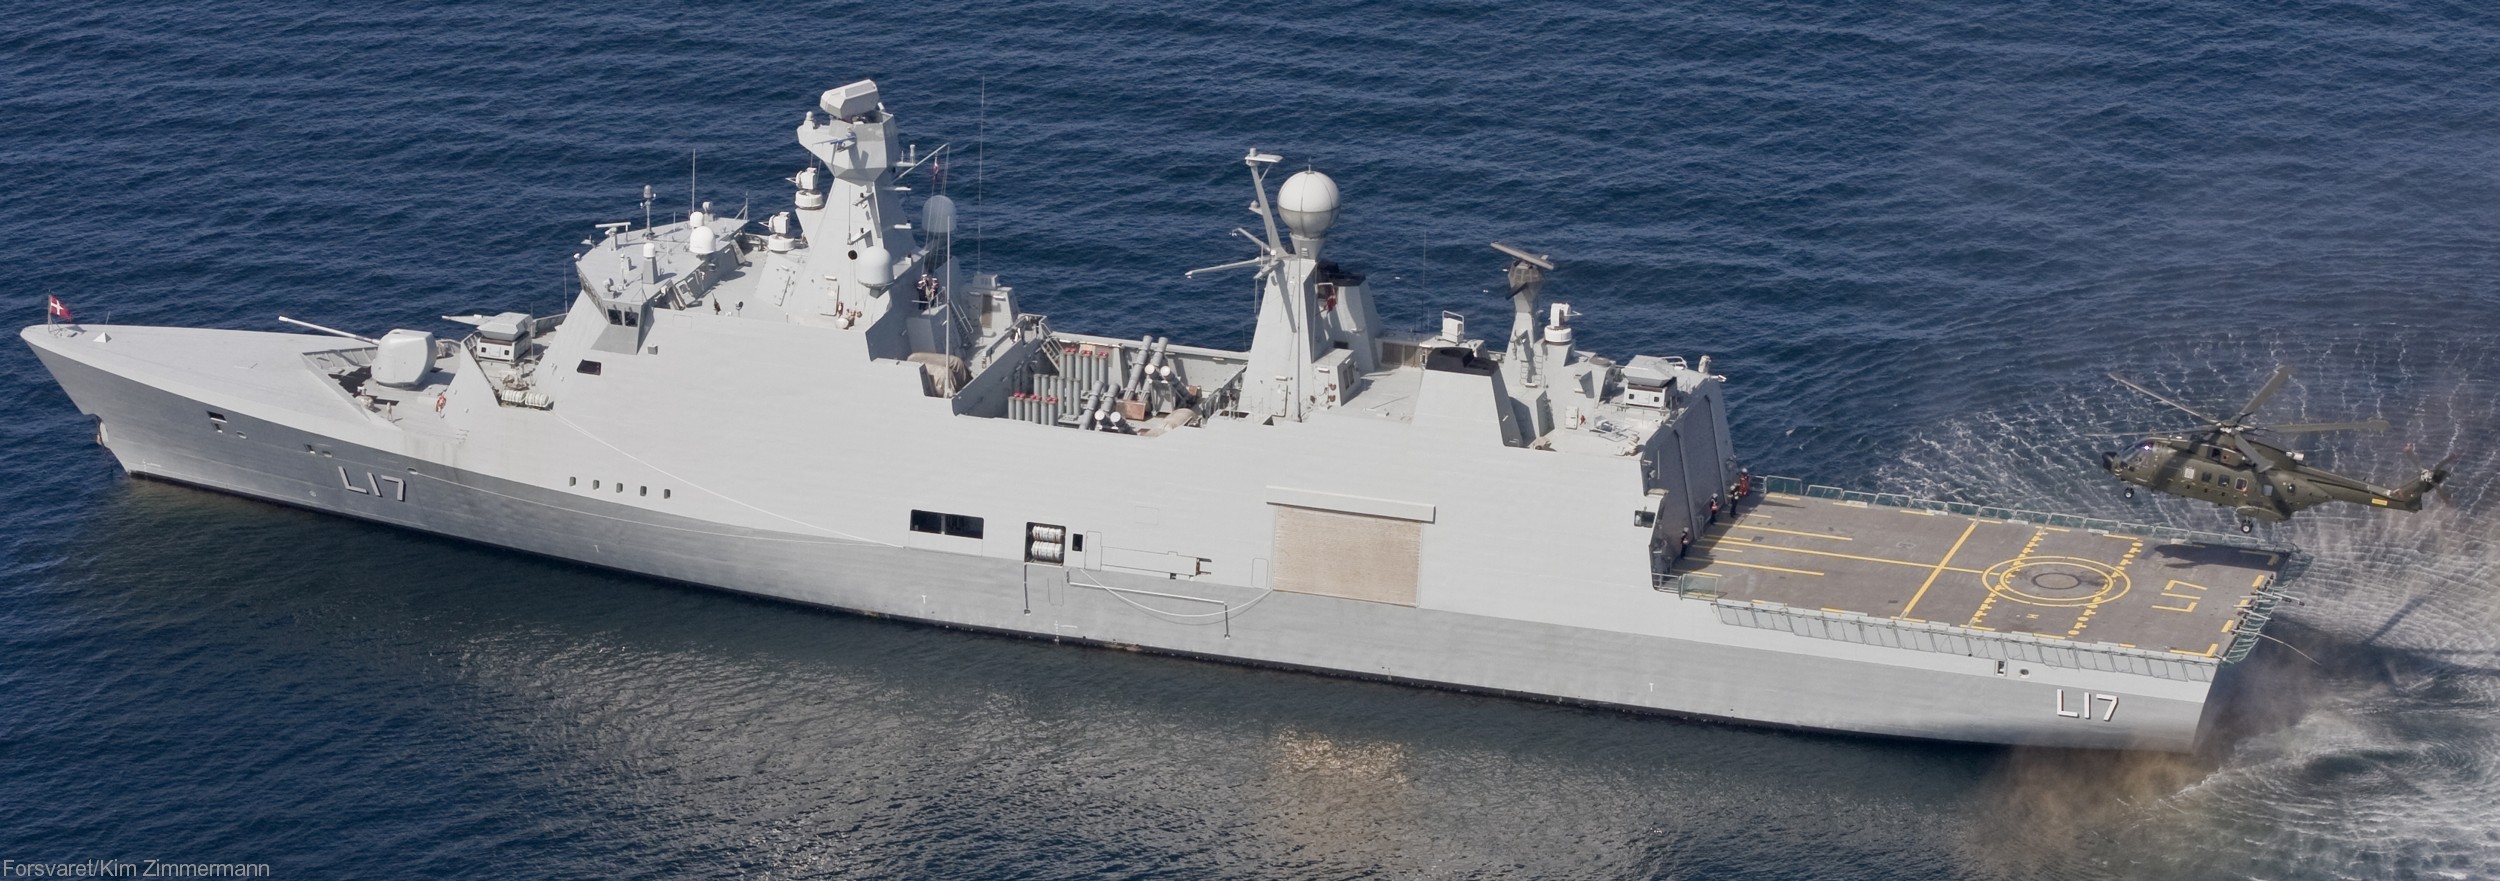 f-342 hdms esbern snare l-17 frigate command support ship royal danish navy 61 aw-101 eh101 helicopter